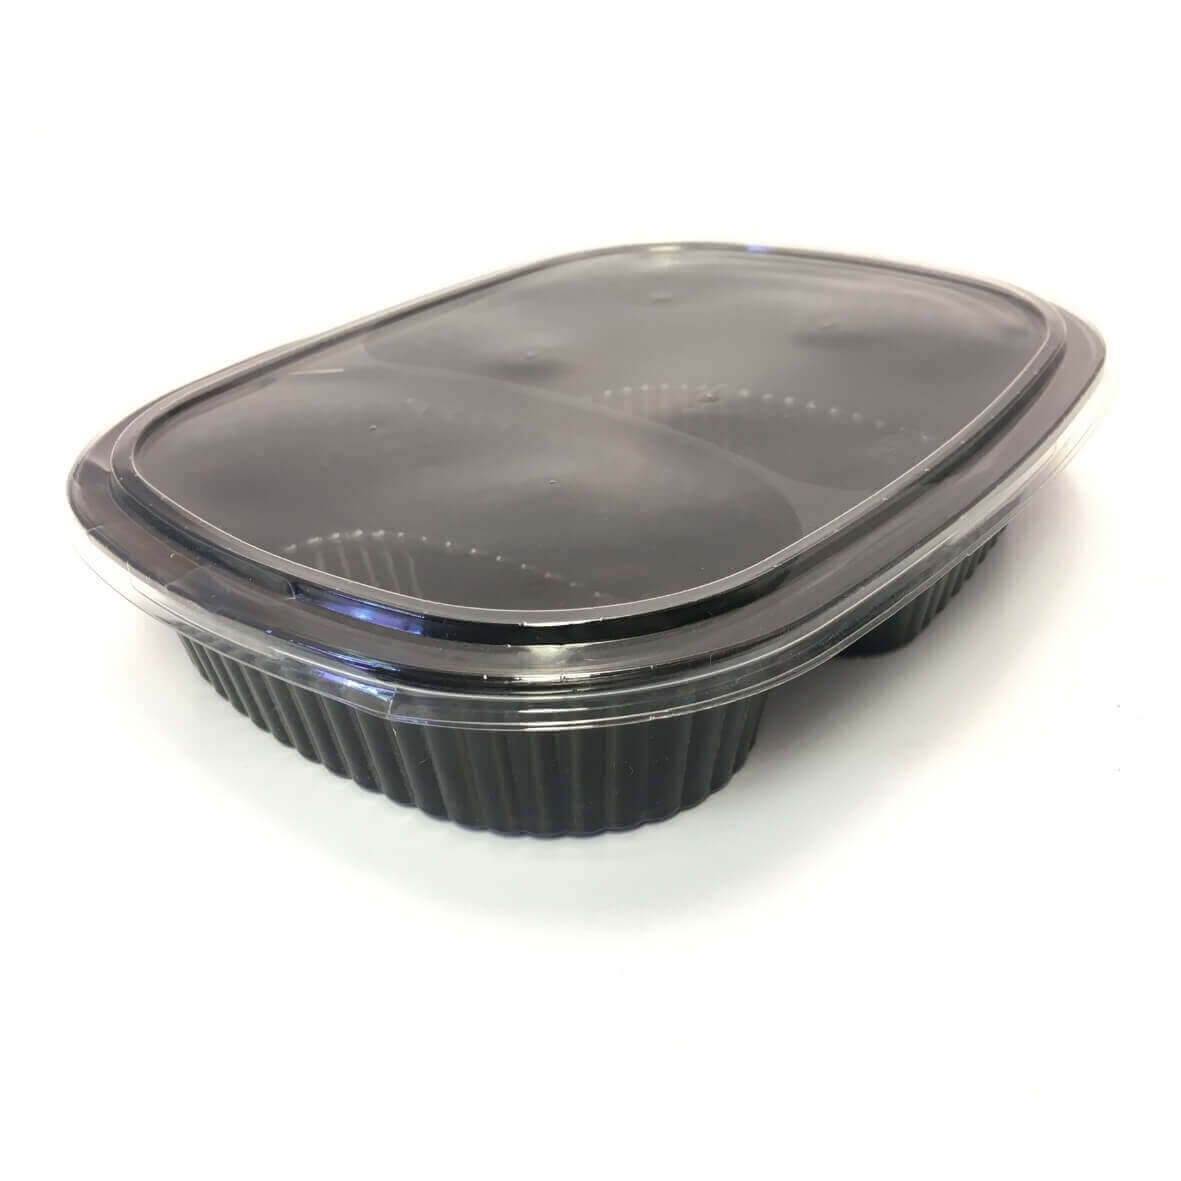 plastic meal container